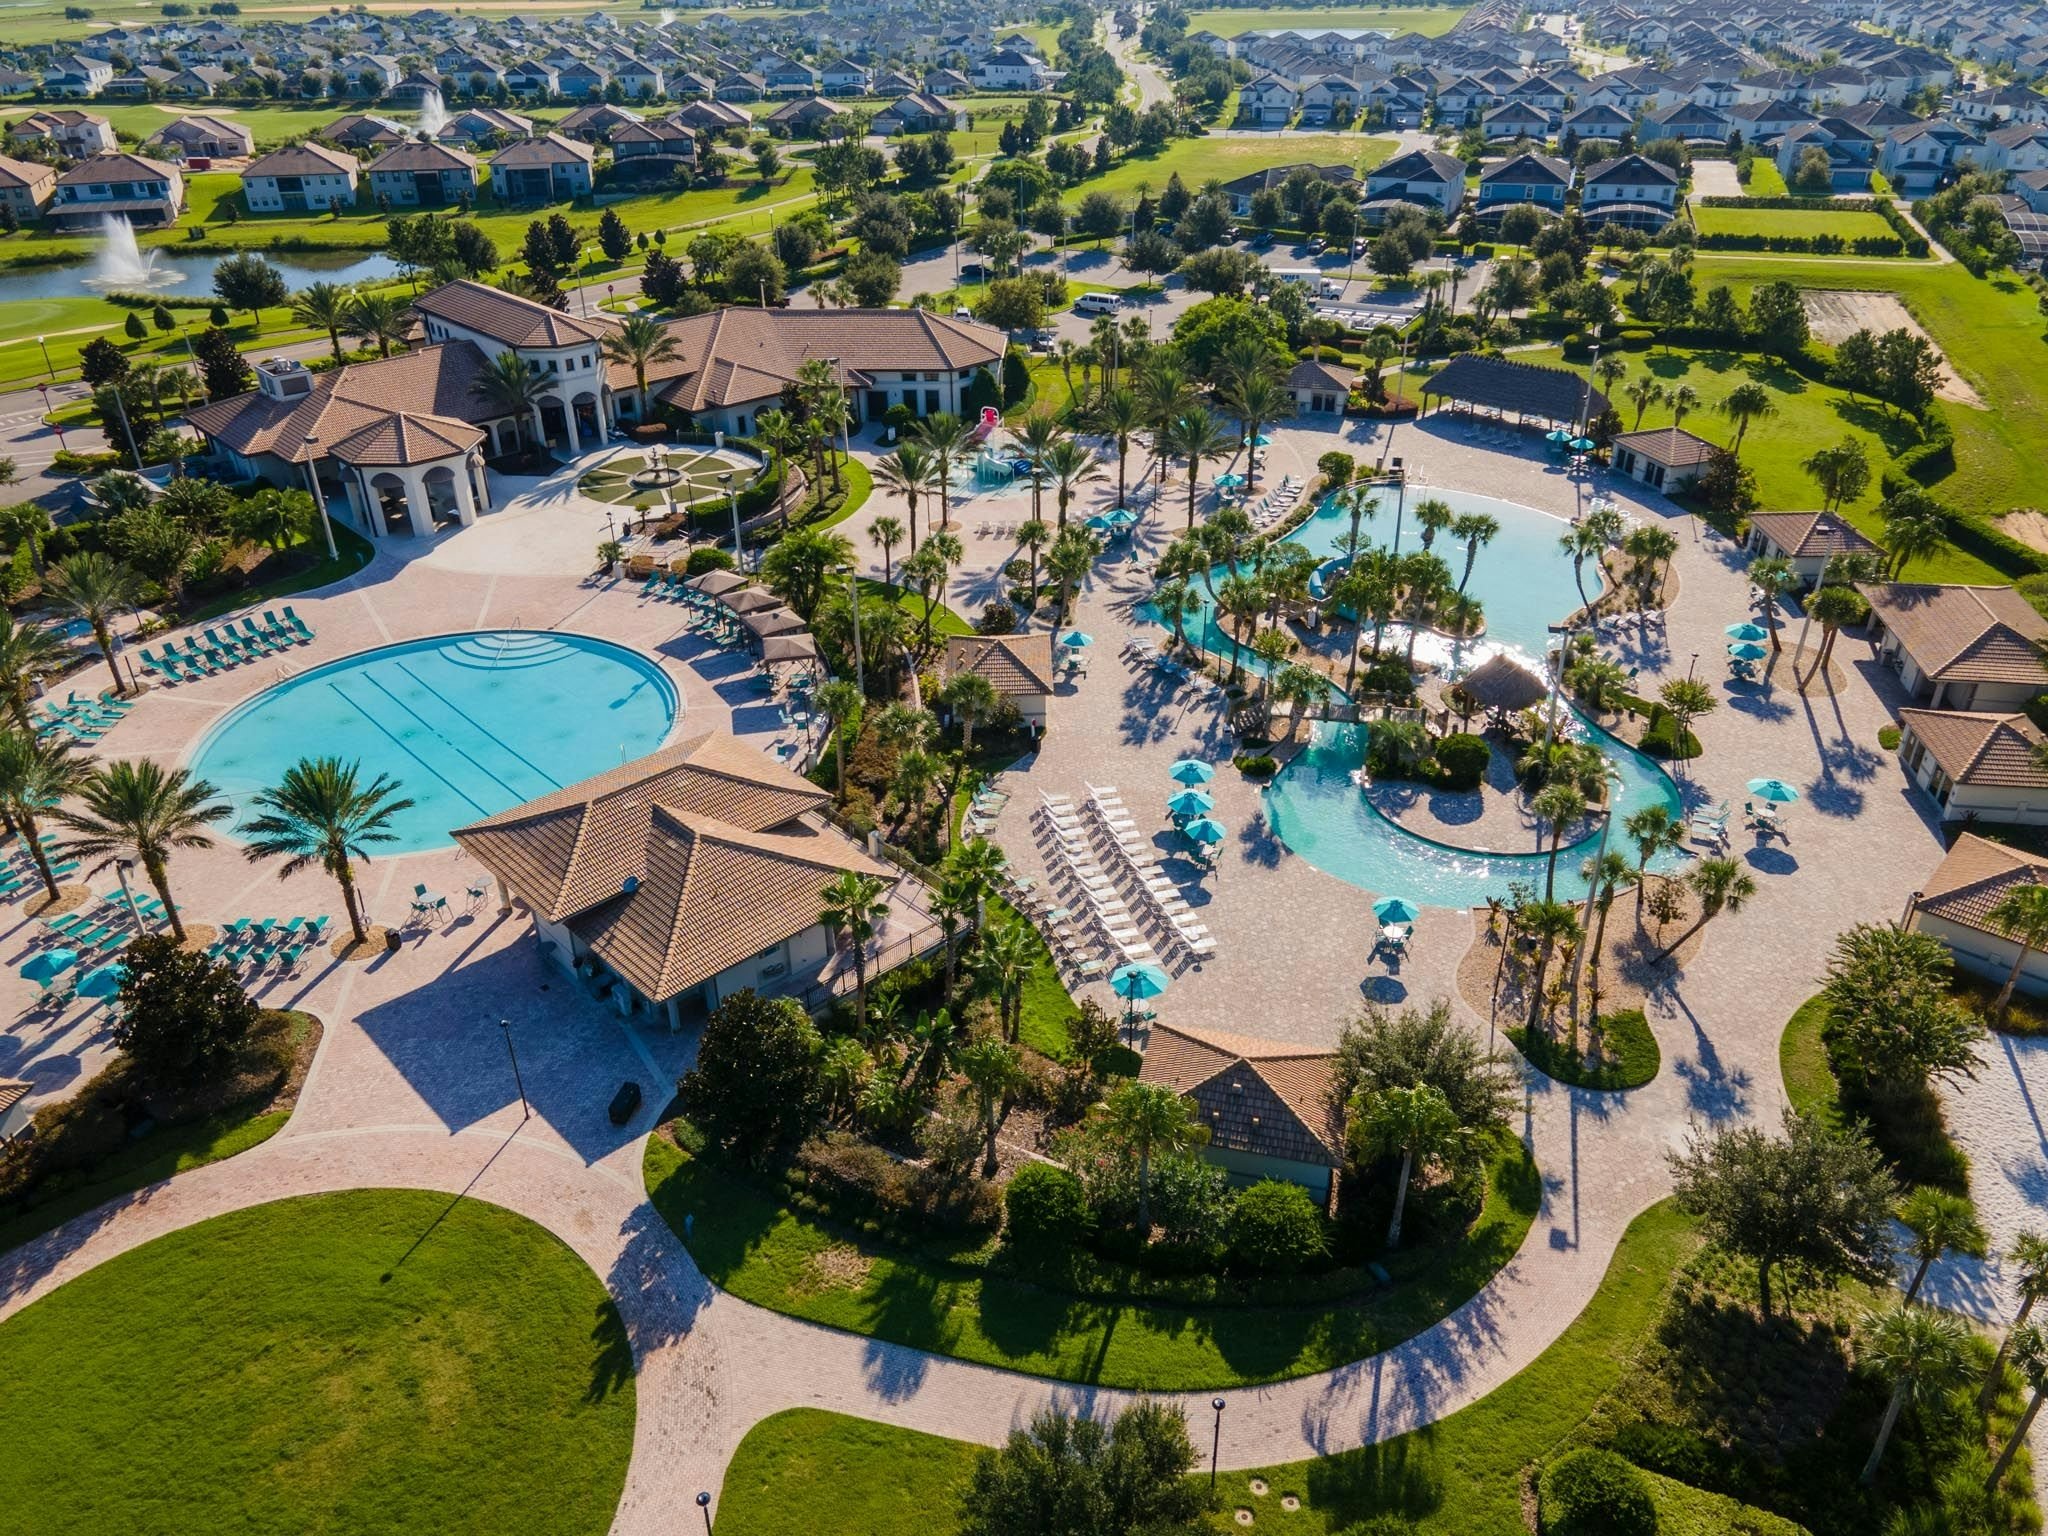 Aerial view of Championsgate Resort community pools and clubhouse